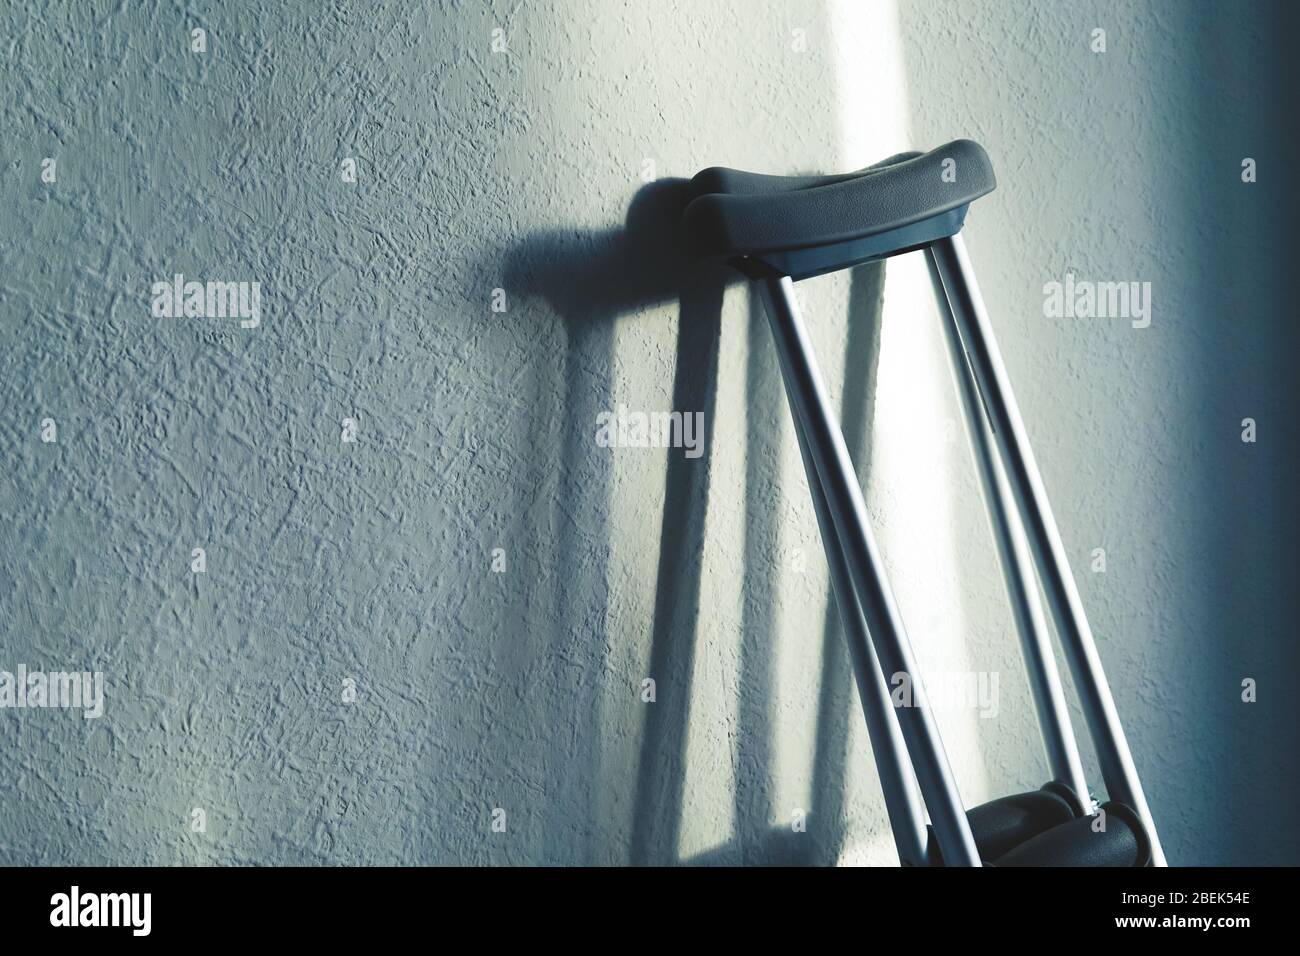 Close up image of crutches are standing against the wall. Place for text. Stock Photo